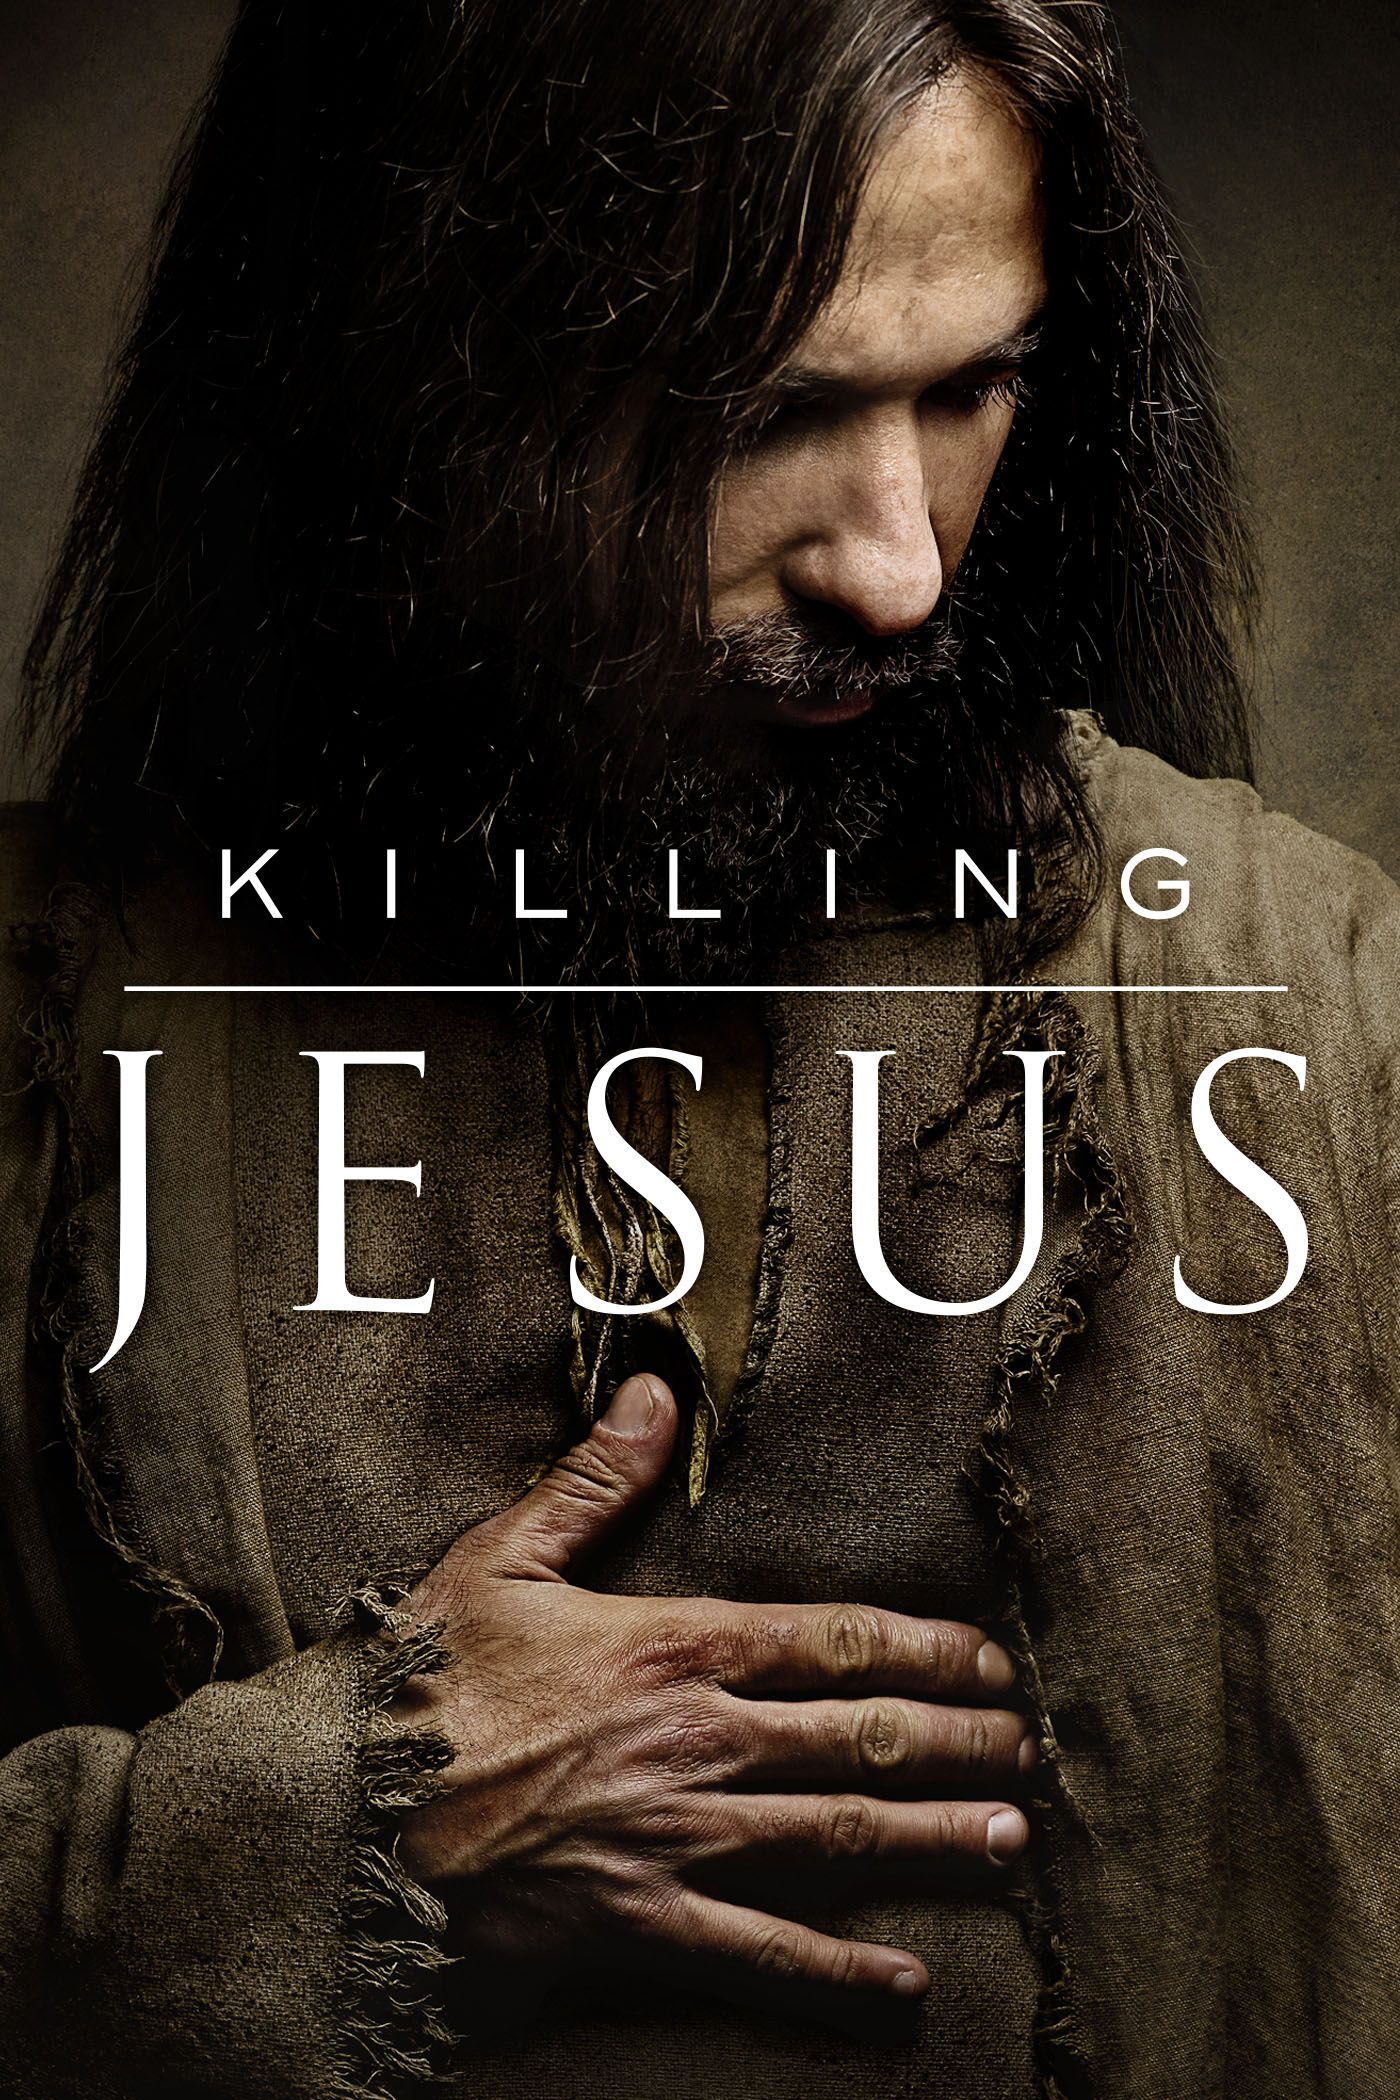 the passion of christ full movie